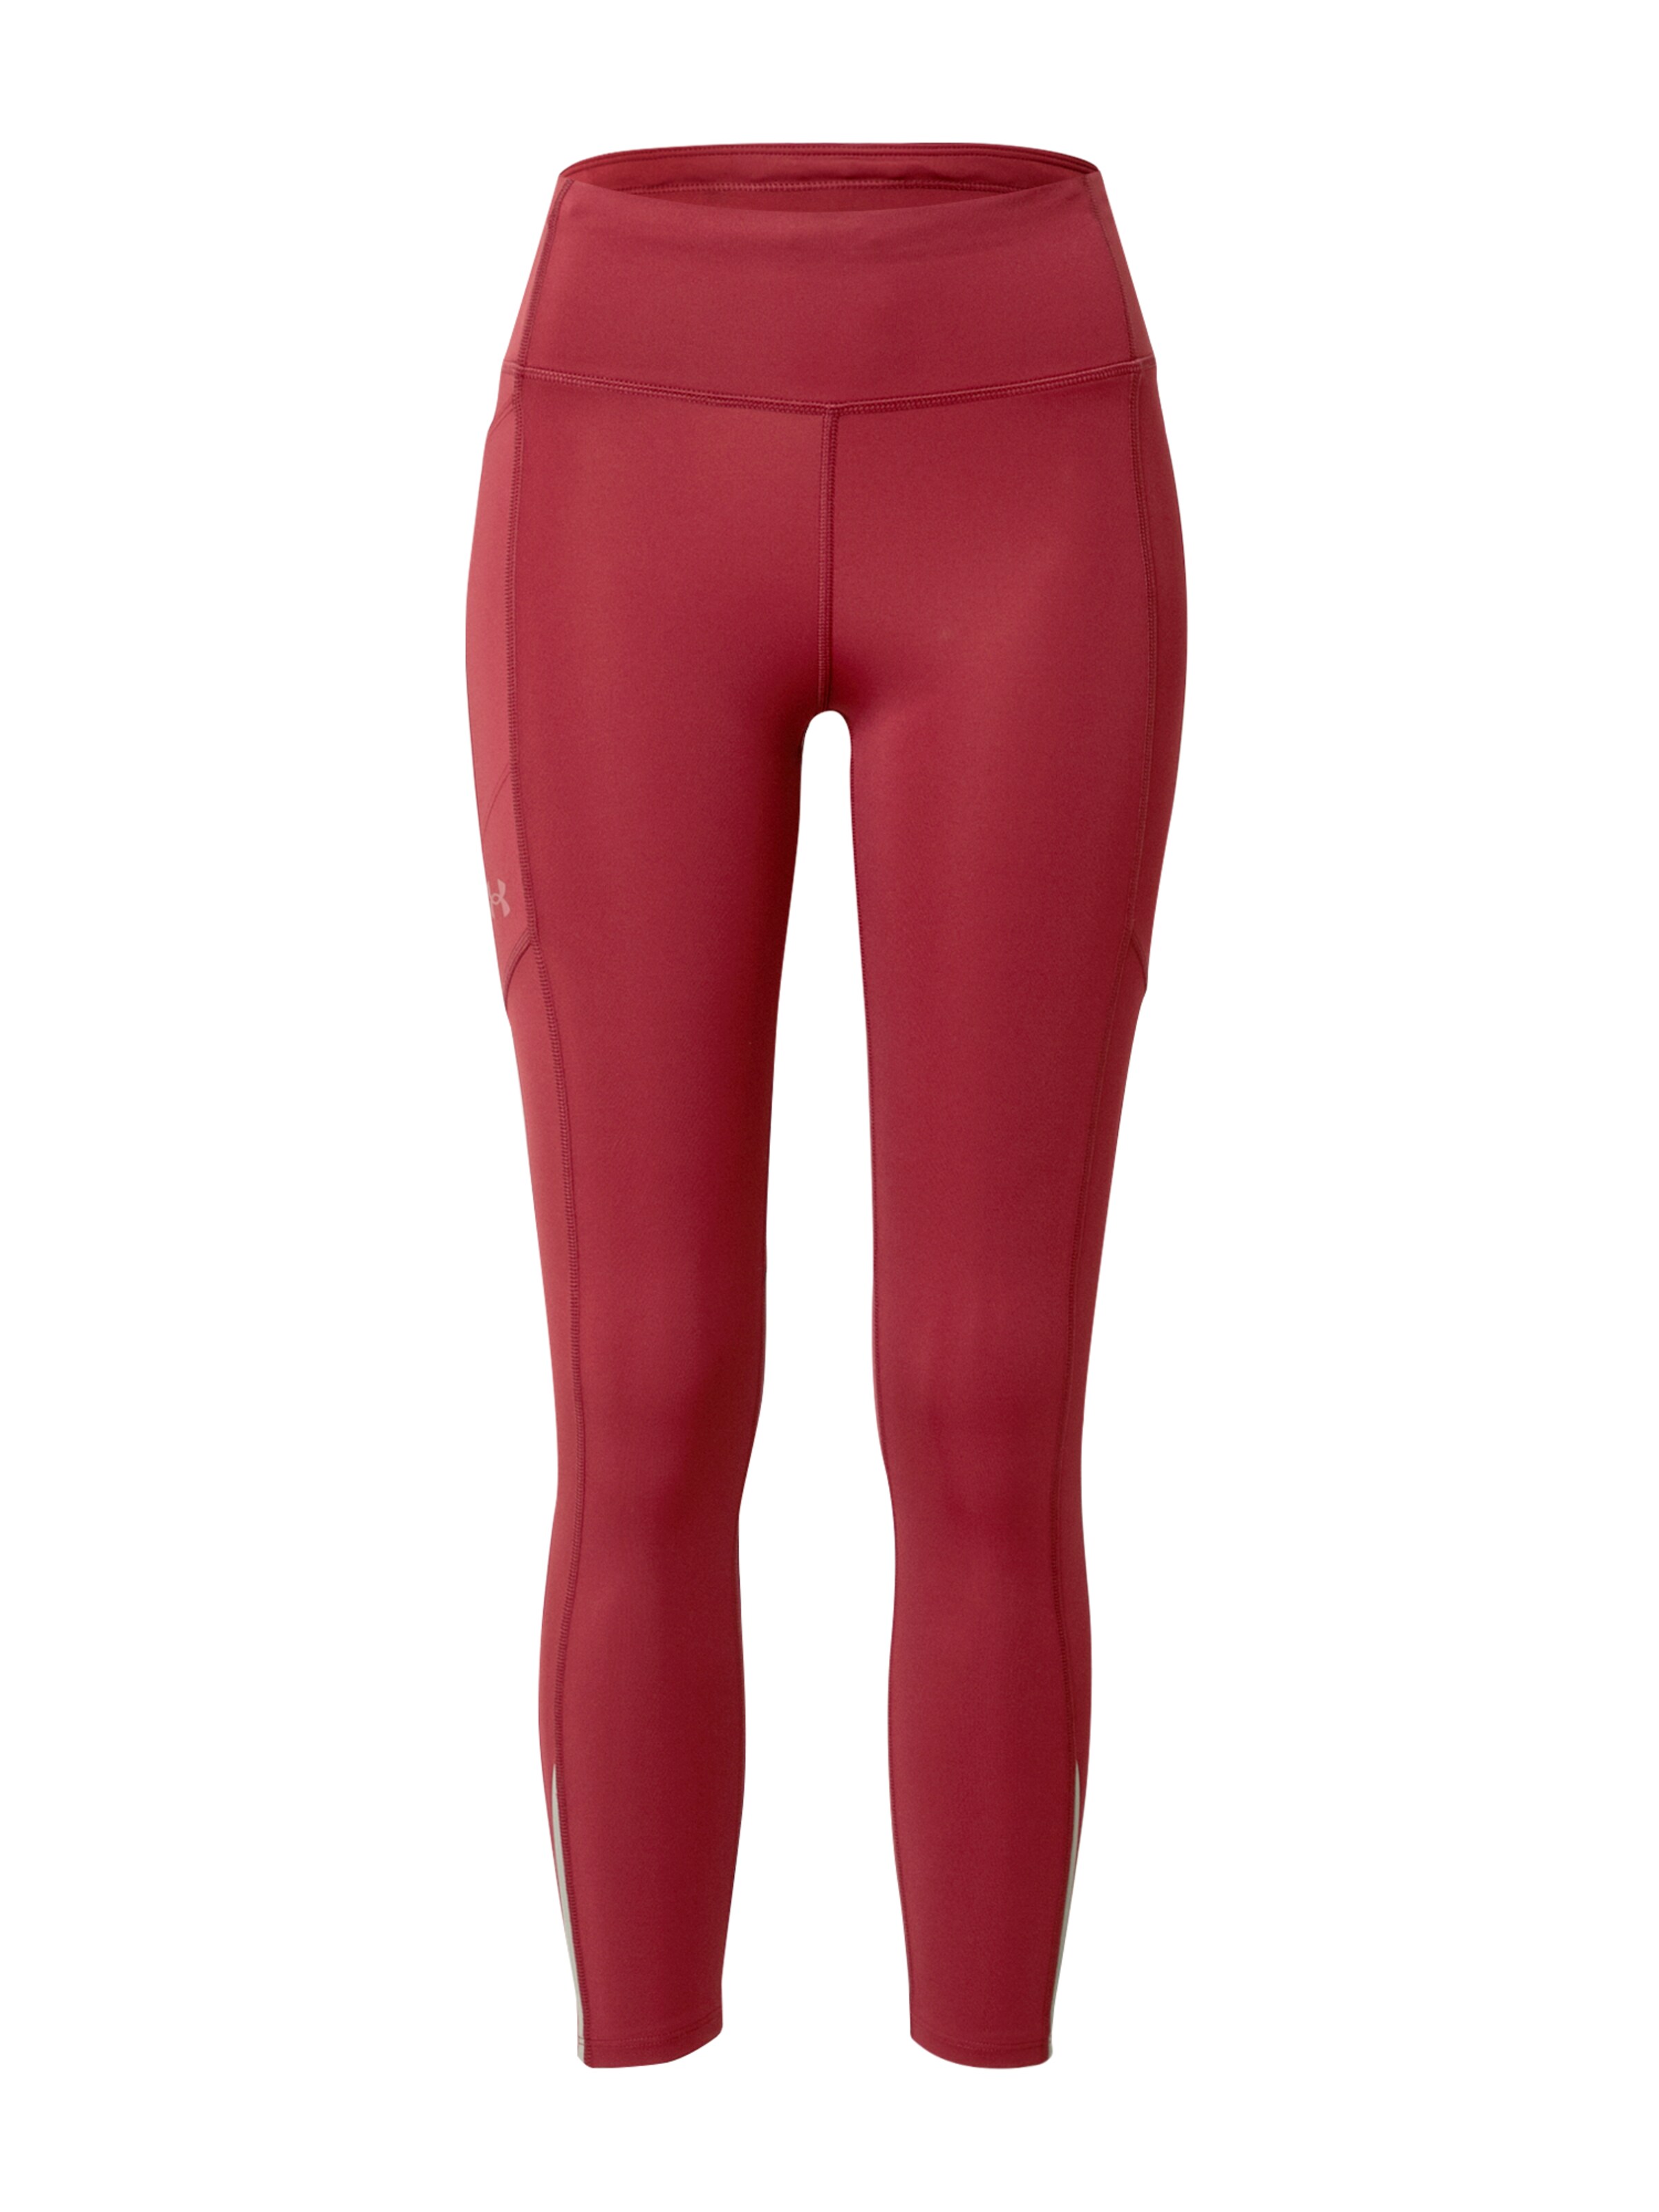 LK9C5 Sport UNDER ARMOUR Pantaloni sportivi Fly Fast 3.0 in Rosso Scuro 